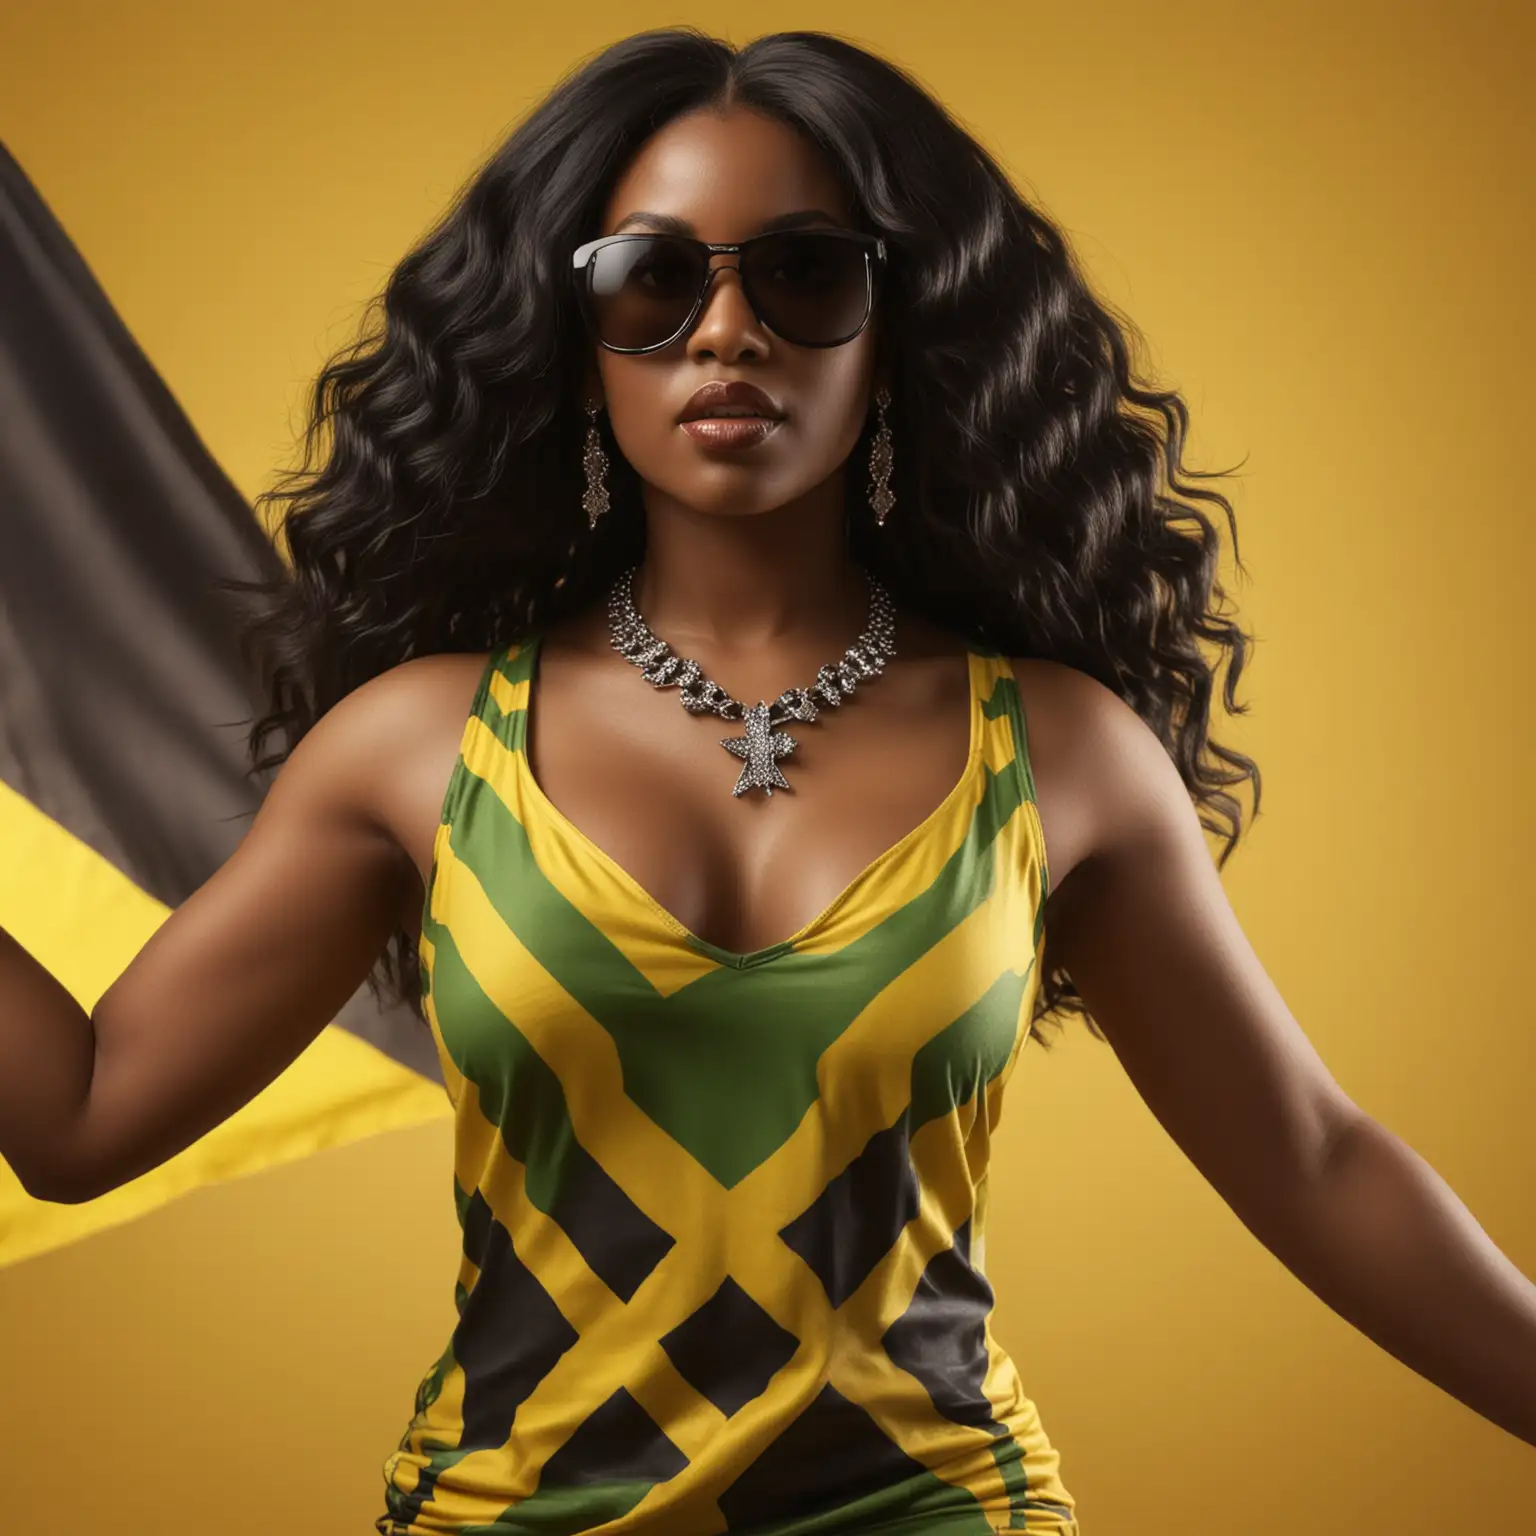 ULTRA REALISTIC high definition, CURVY DARK SKIN BLACK WOMAN, WITH LONG BLACK HAIR, BLACK DIAMOND SUNGLASSES, WEARING A SMALL Jamaican flag DRESS, A DIAMOND NECKLACE, DANCING, ON A yellow BACKGROUND IN CINEMATIC LIGHTING